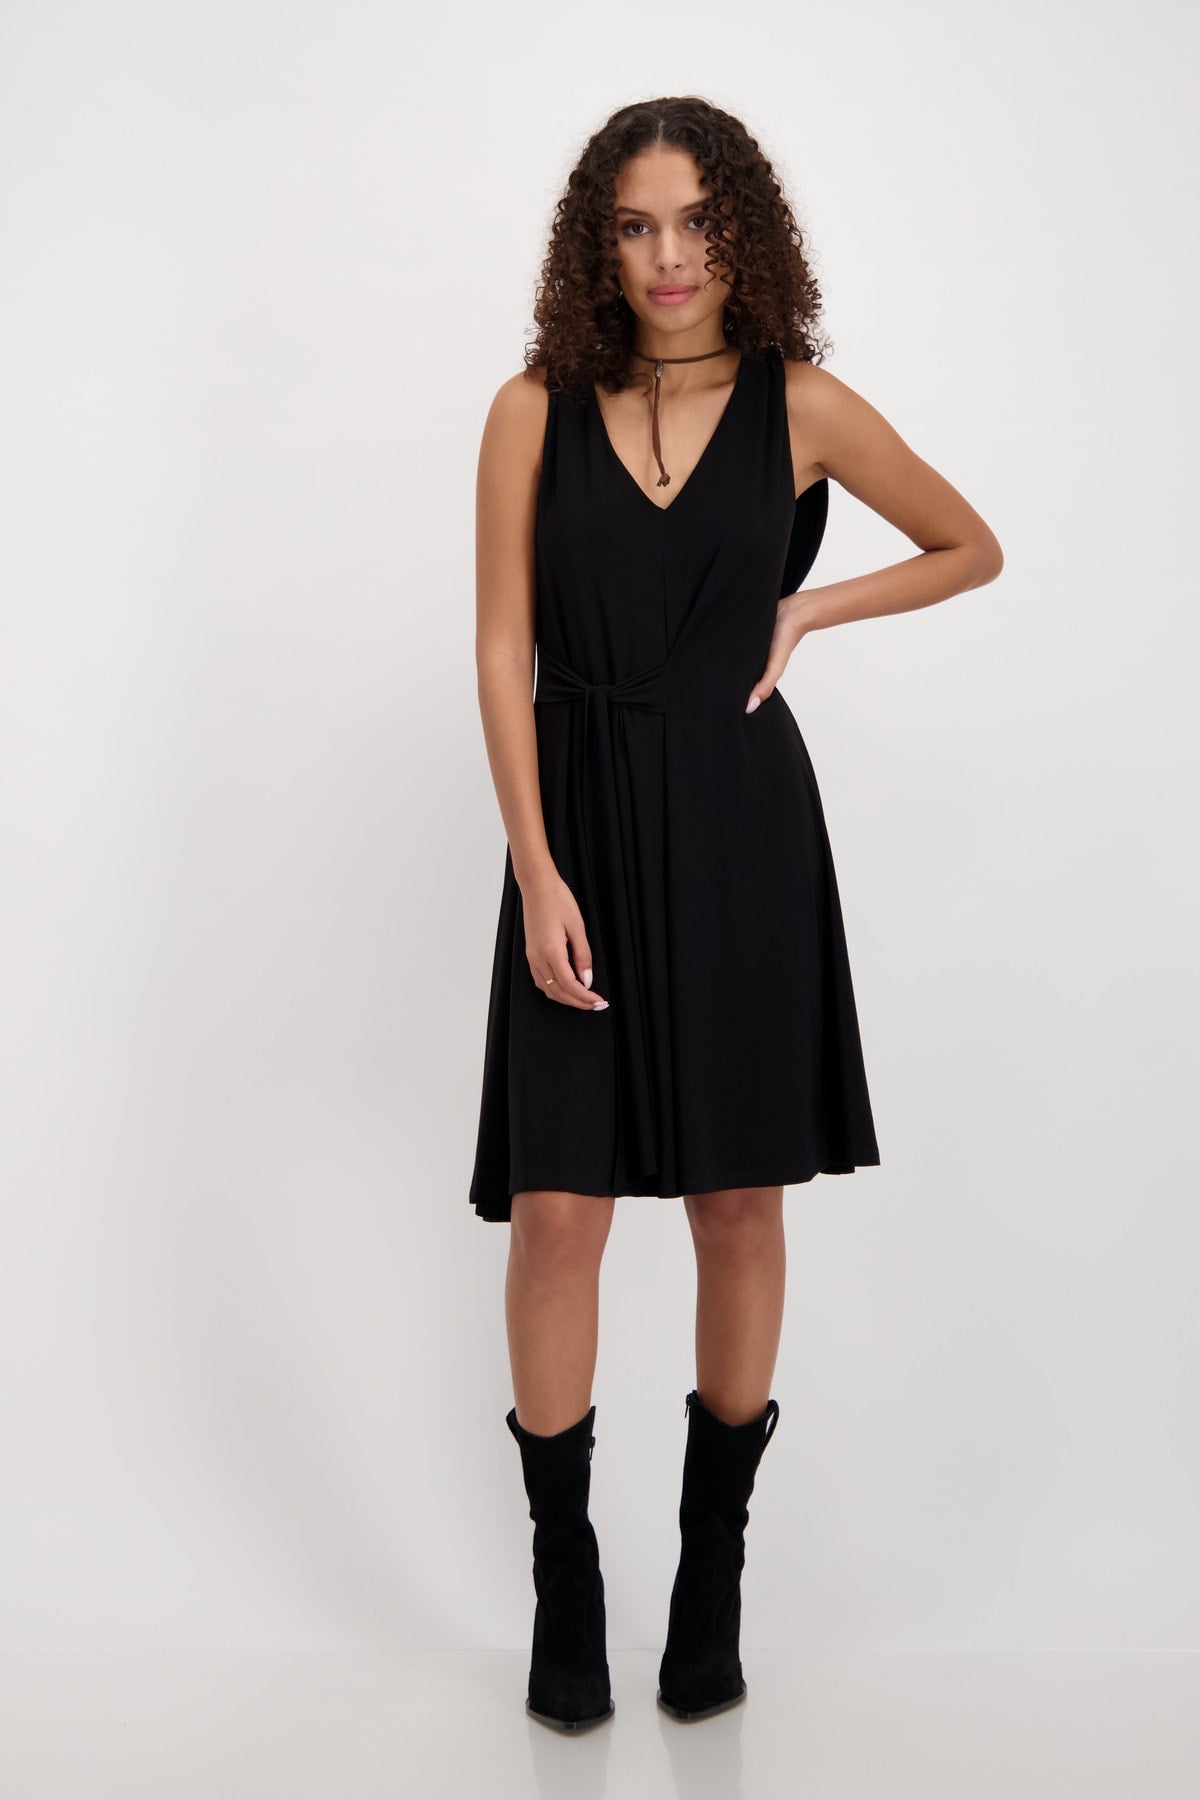 Monari Elastic Dress – The & and One Accessories Shoes, Only Clothing